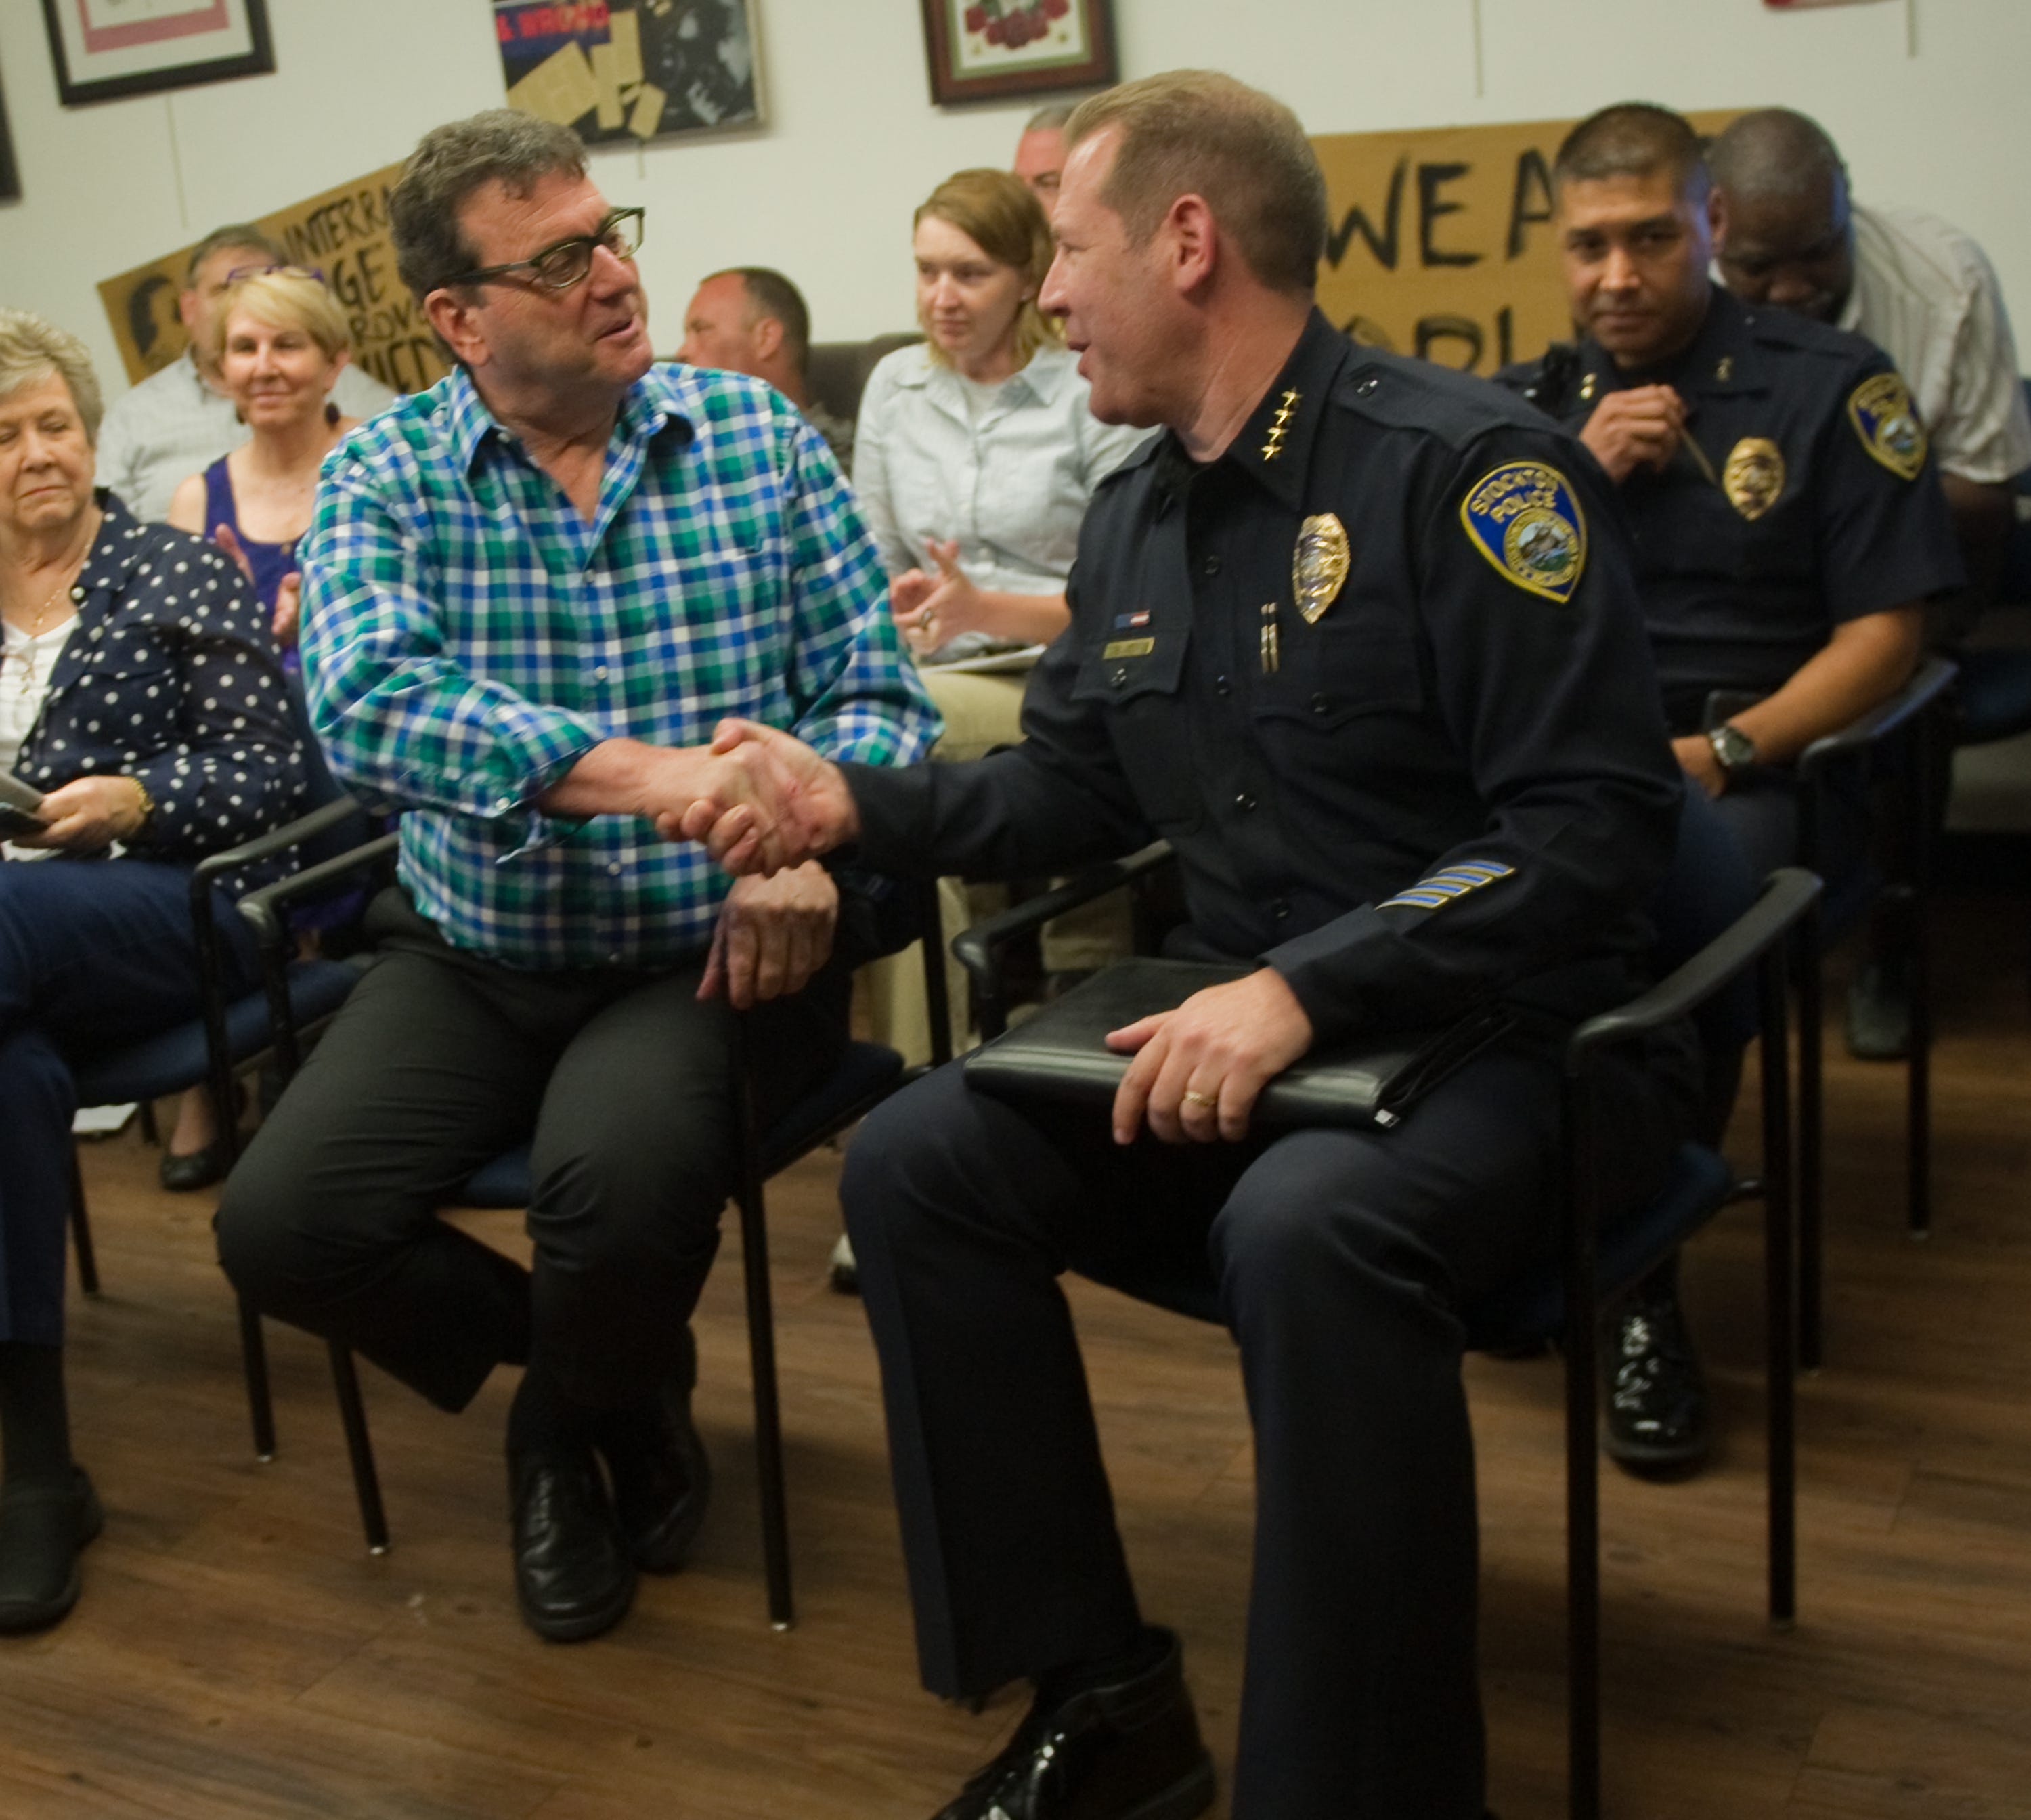 People listen as Stockton Police Chief Eric Jones, seated right, shakes hands with San Joaquin Pride Center board member Bob Kolber after a meeting at the center in downtown Stockton to address an anti-gay letter-to-the editor that Stockton police Lt. Toby Wills sent to The Record.